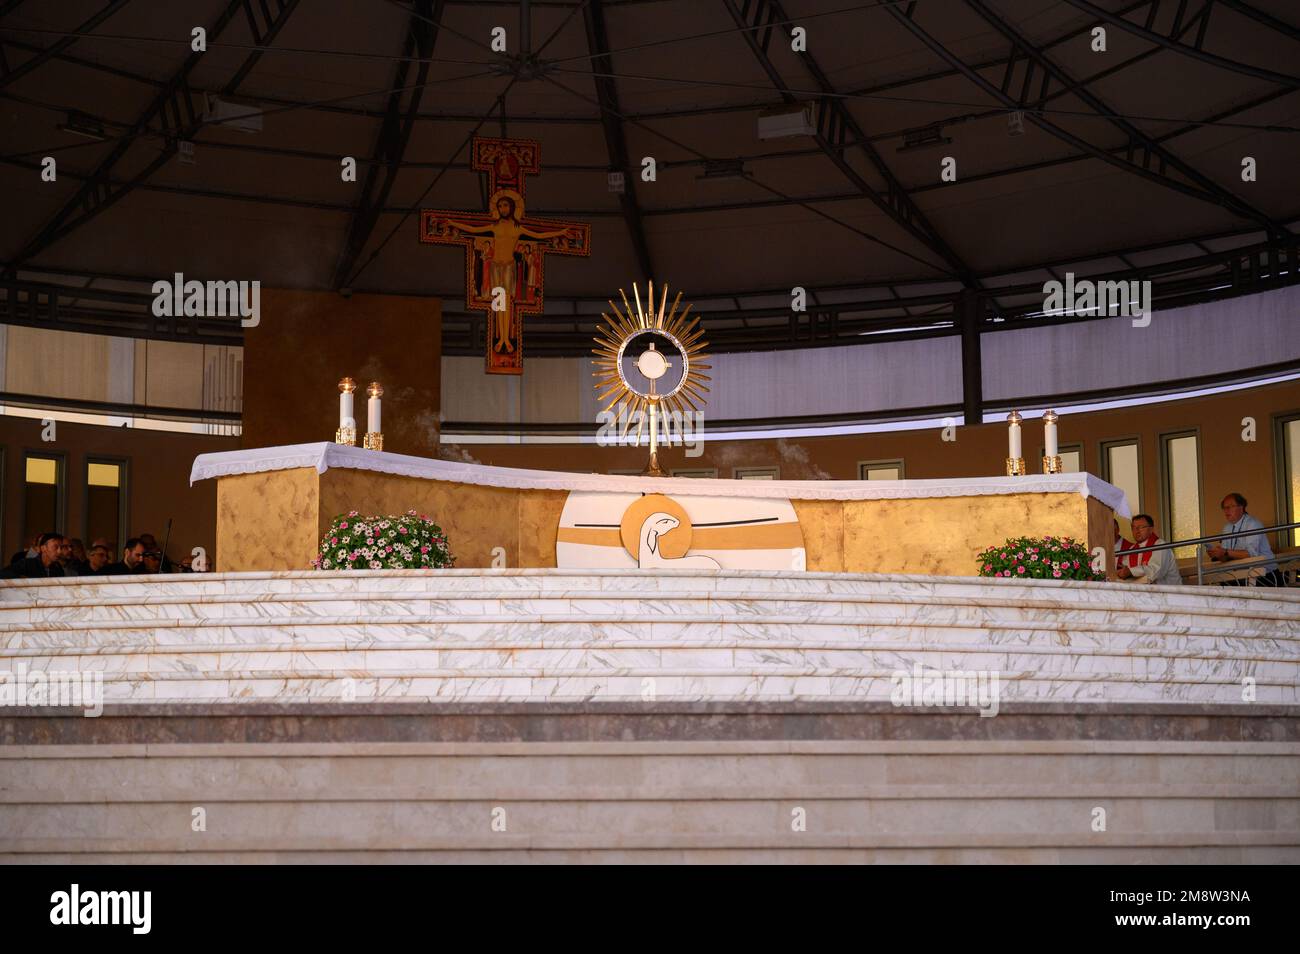 Adoration of Jesus Christ present in the Blessed Sacrament after the evening Holy Mass in Medjugorje, Bosnia and Herzegovina. Stock Photo